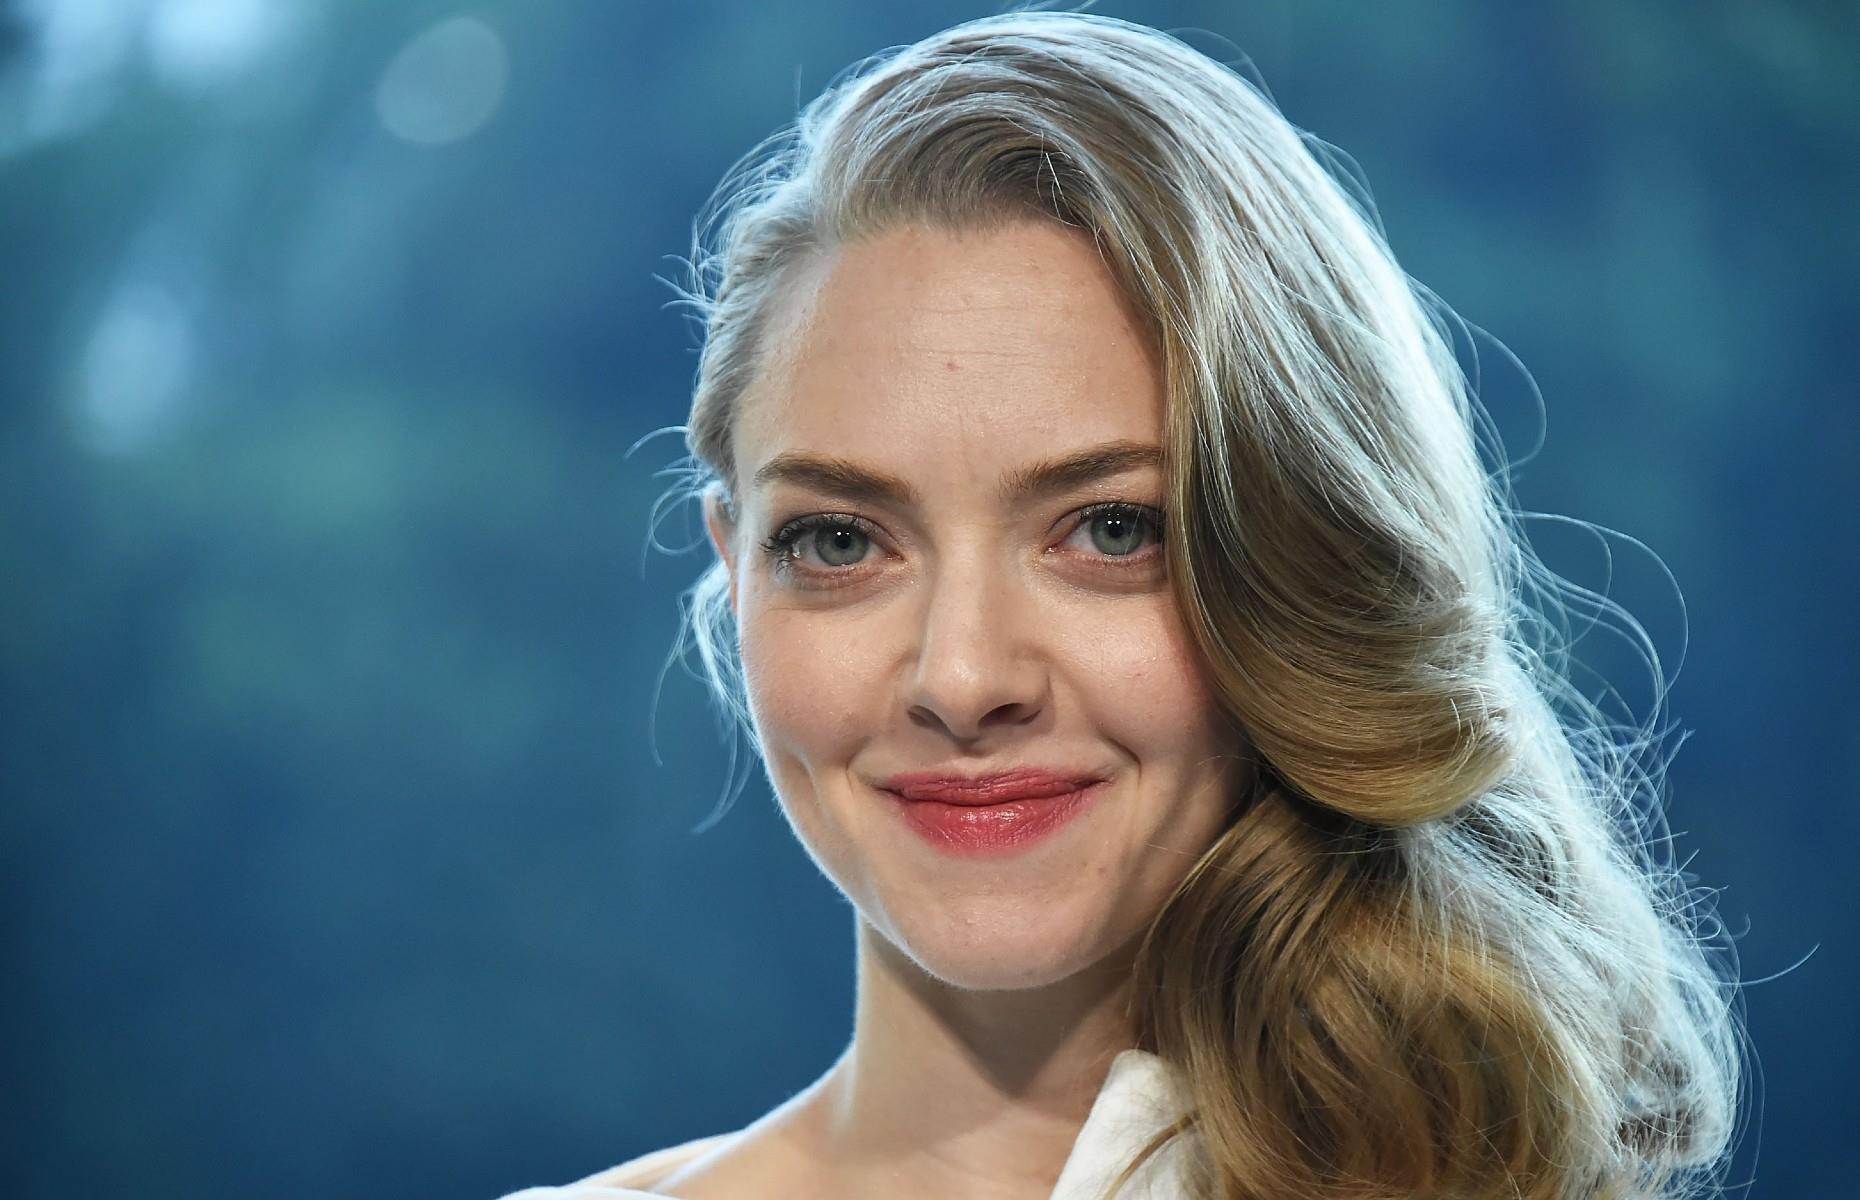 Amanda Seyfried's taxidermy collection